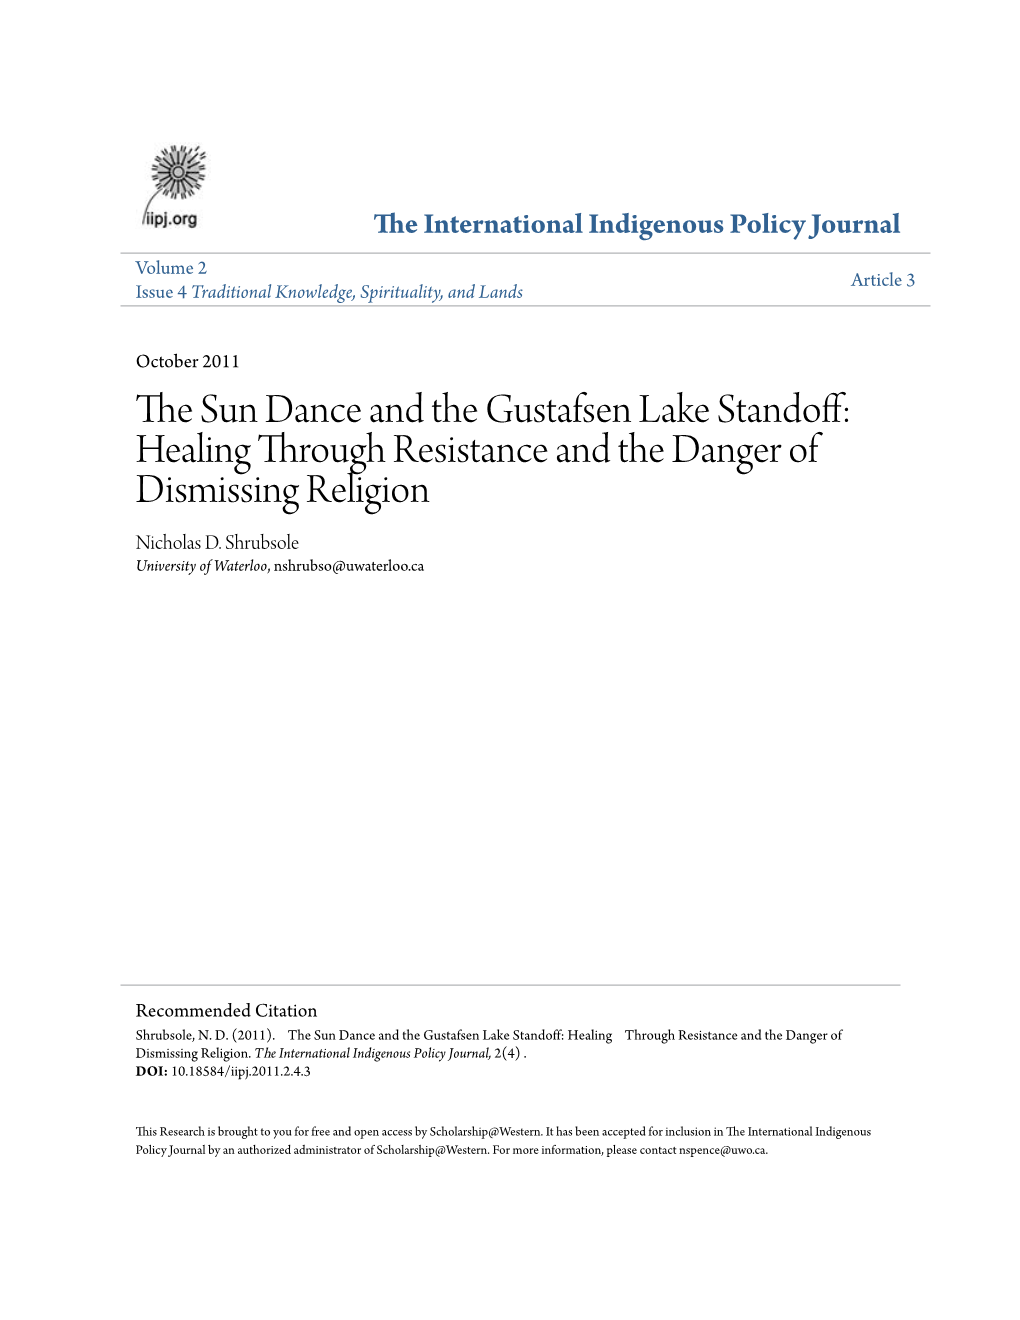 The Sun Dance and the Gustafsen Lake Standoff: Healing Through Resistance and the Danger of Dismissing Religion Nicholas D